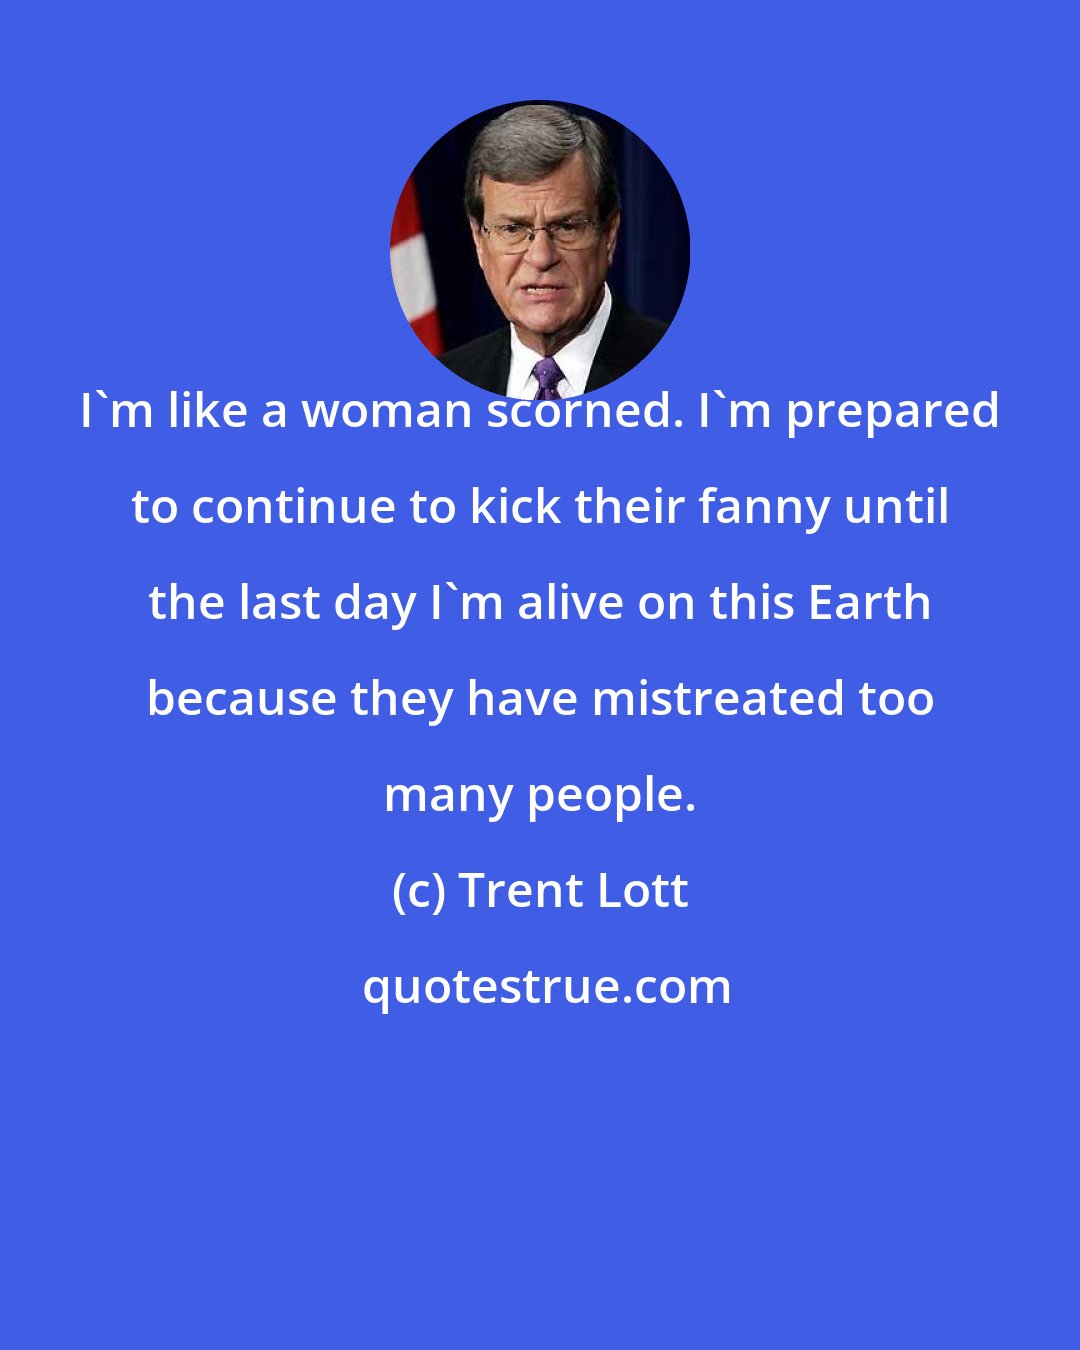 Trent Lott: I'm like a woman scorned. I'm prepared to continue to kick their fanny until the last day I'm alive on this Earth because they have mistreated too many people.